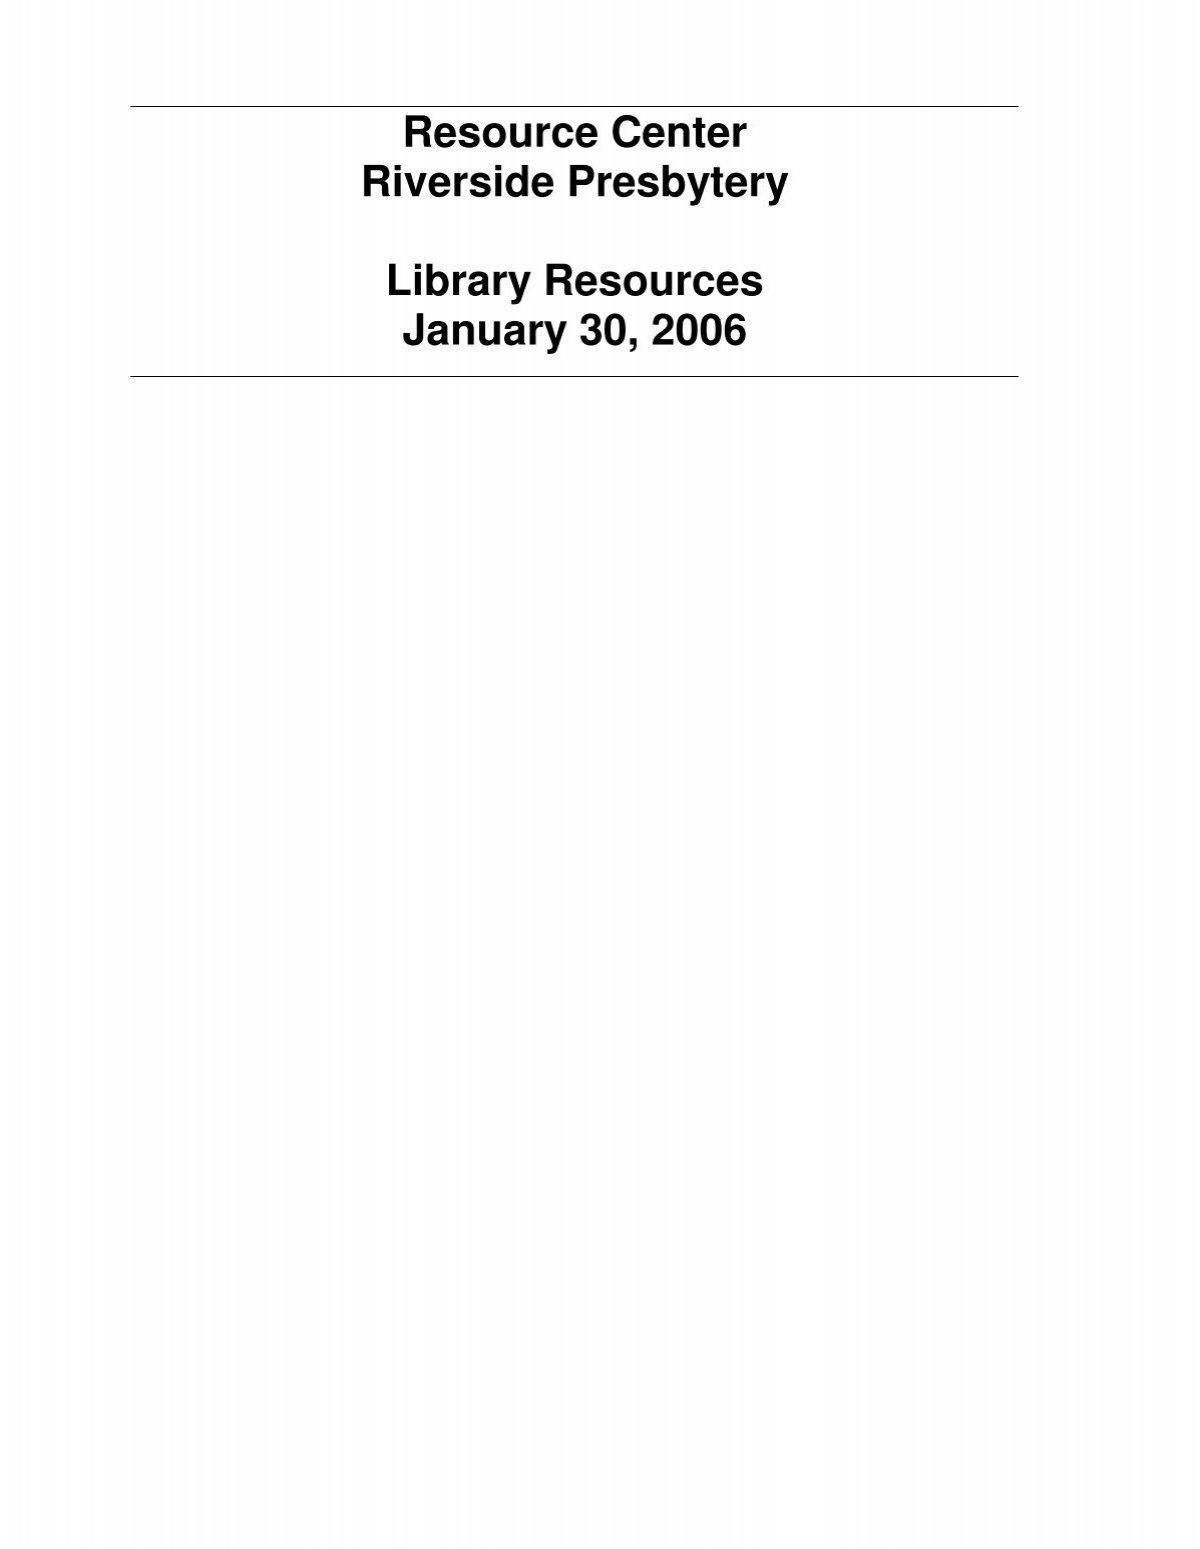 Library Resource Resources Center Presbytery Riverside January